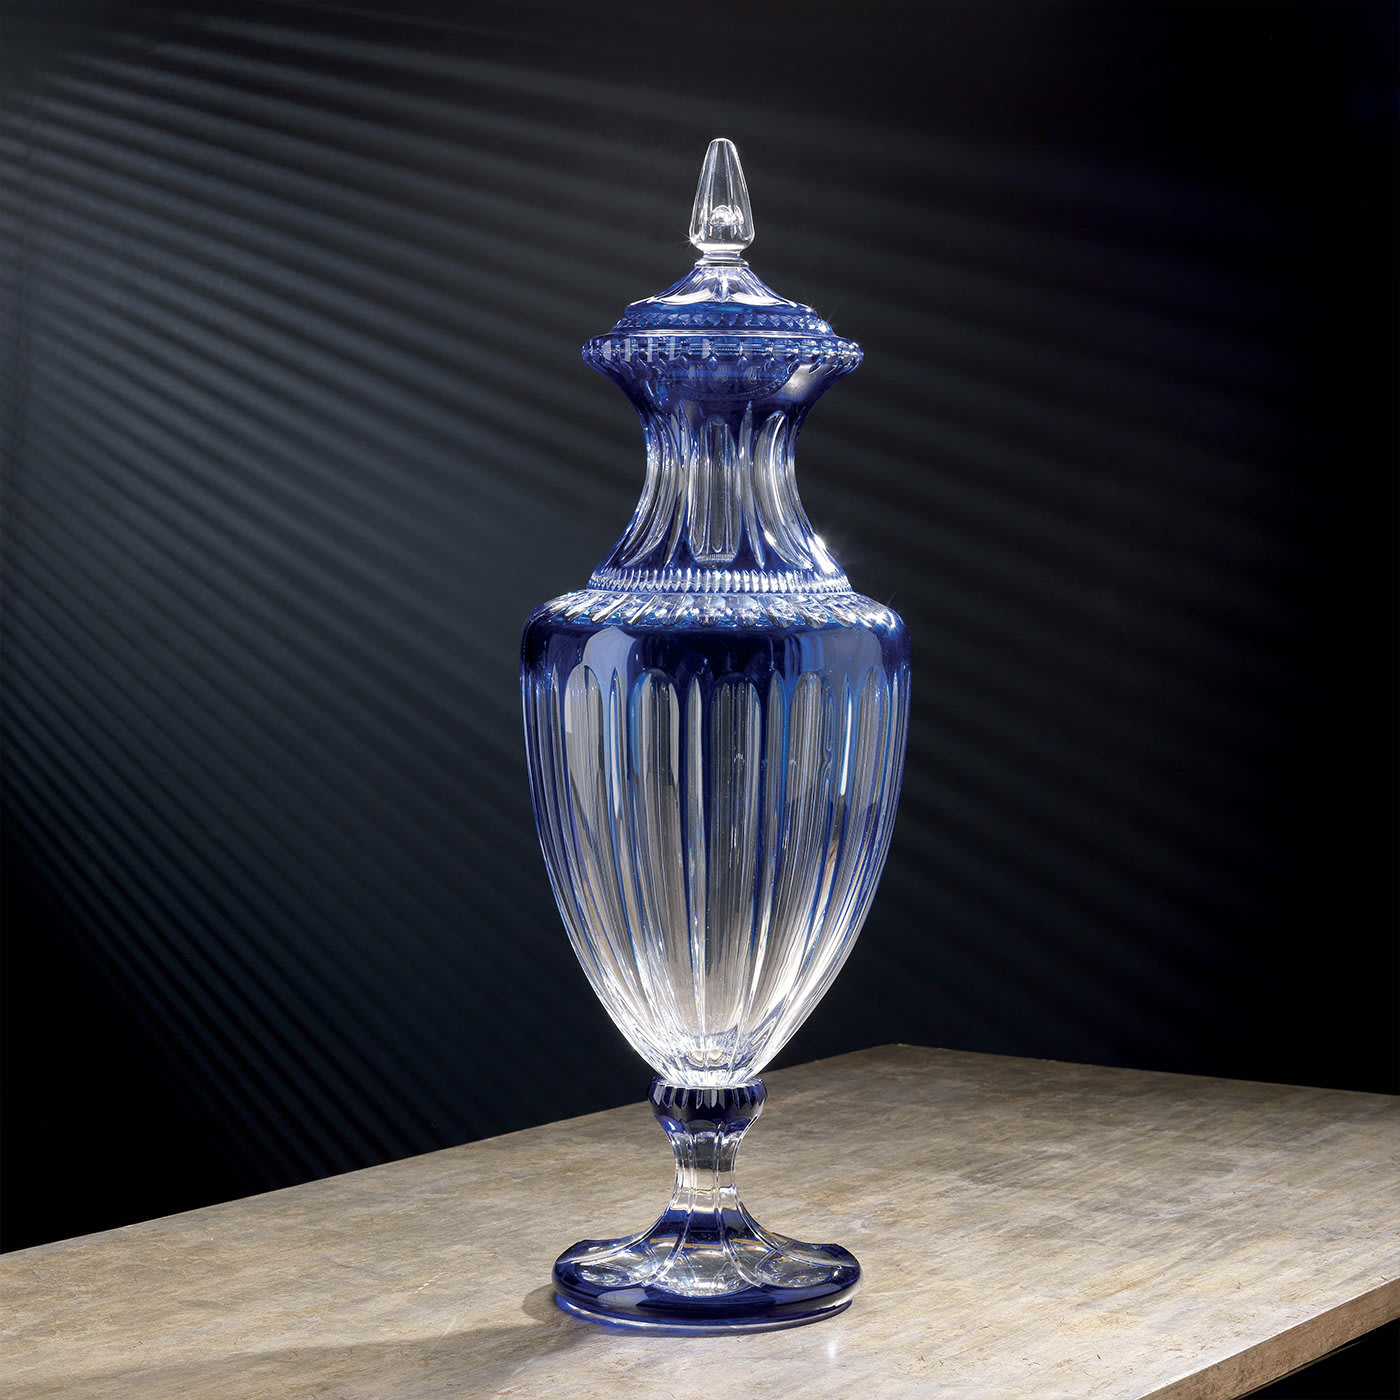 Amphora Crystal Vase in Amber and Blue - Nuova Cev